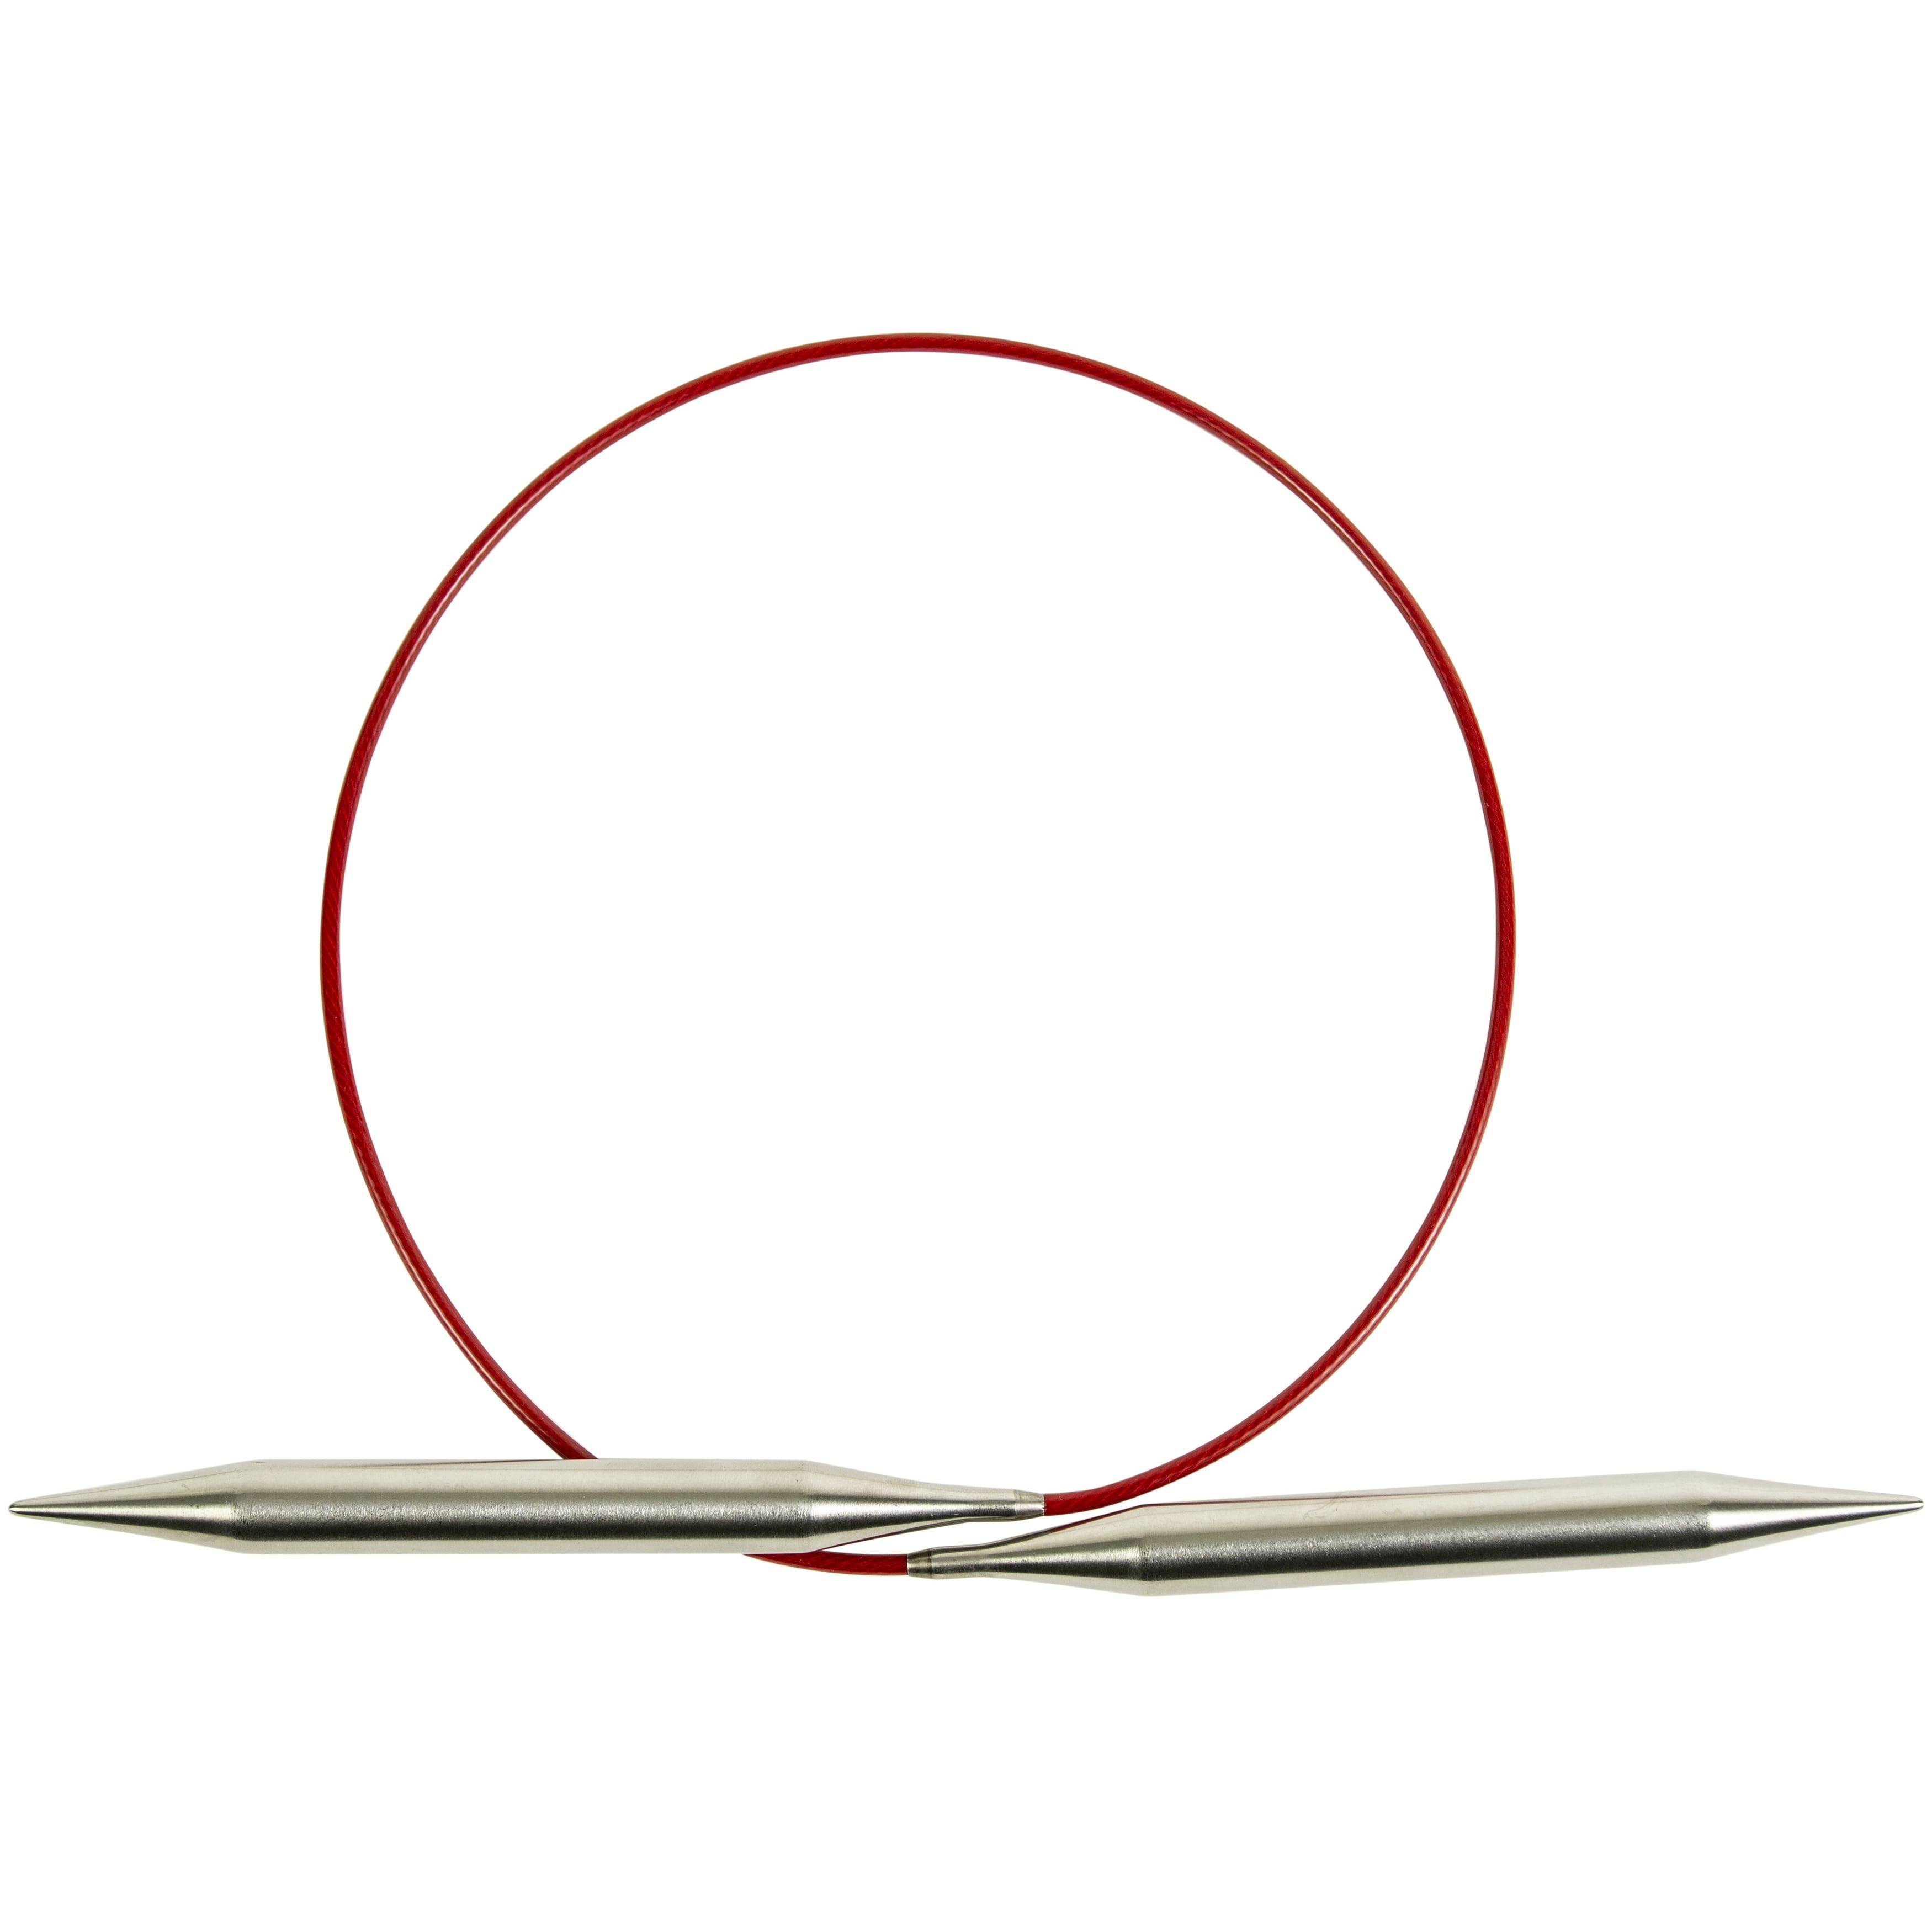  ChiaoGoo Red Lace Circular 32 inch (81cm) Stainless Steel  Knitting Needle Size US 8 (5mm) 7032-8 : Arts, Crafts & Sewing